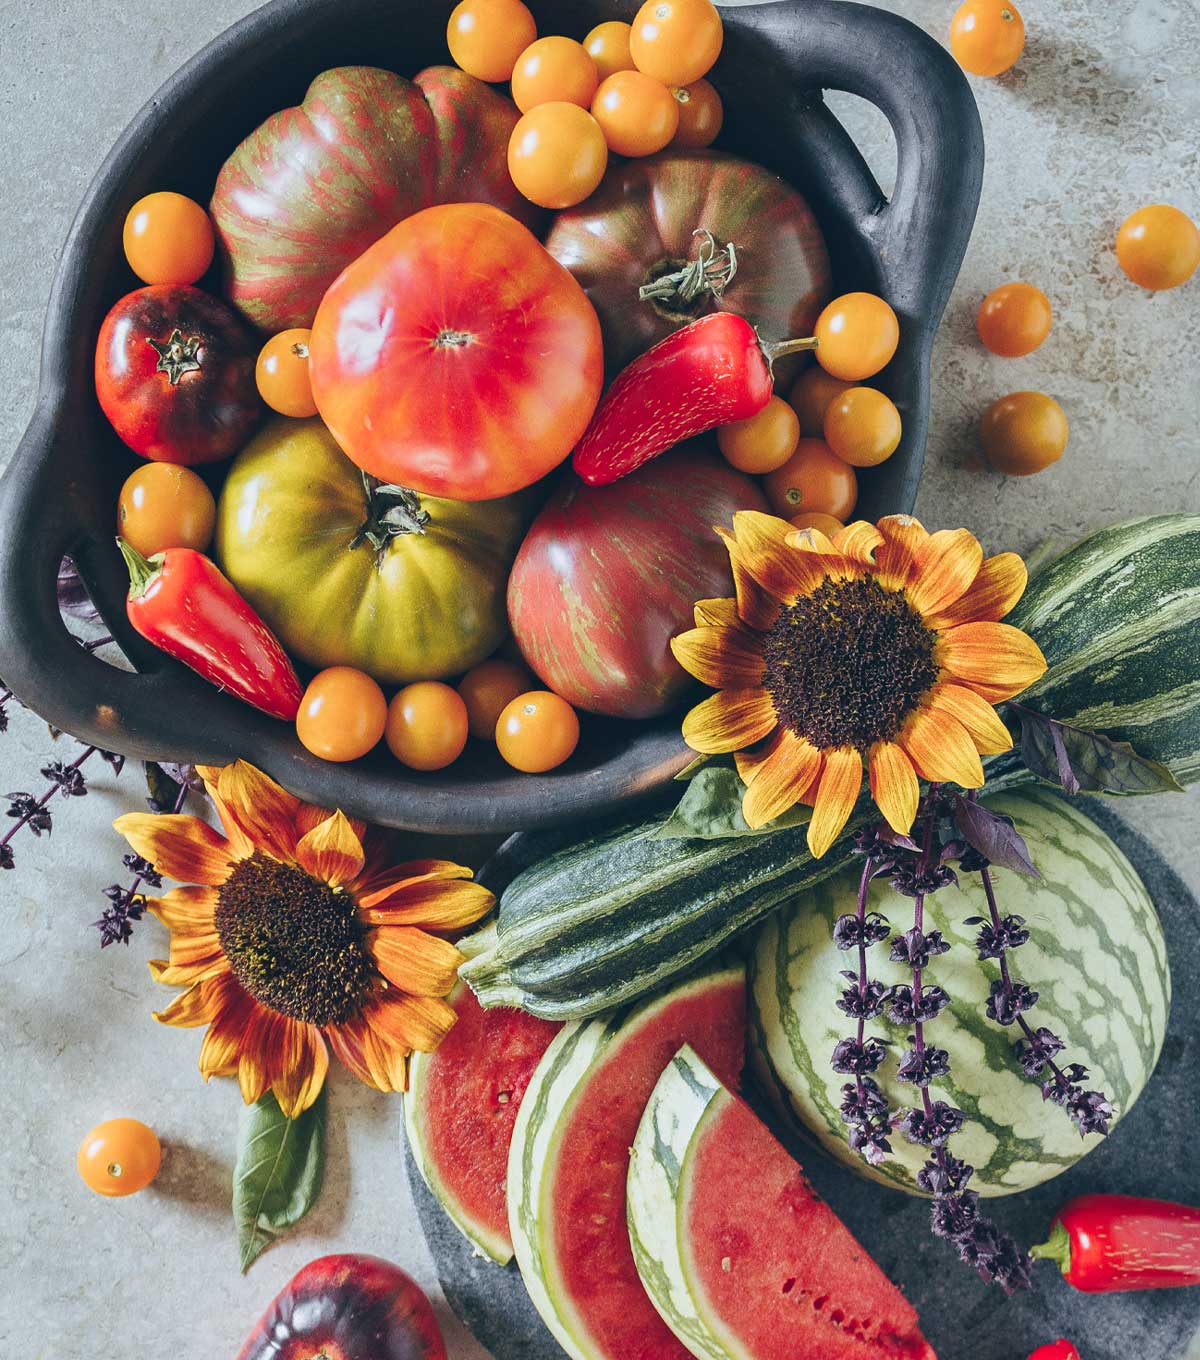 A tabletop display of seasonal eating produce for August. A bowl filled with heirloom tomatoes, zucchini squash, peppers, sunflowers, herbs, and watermelon.